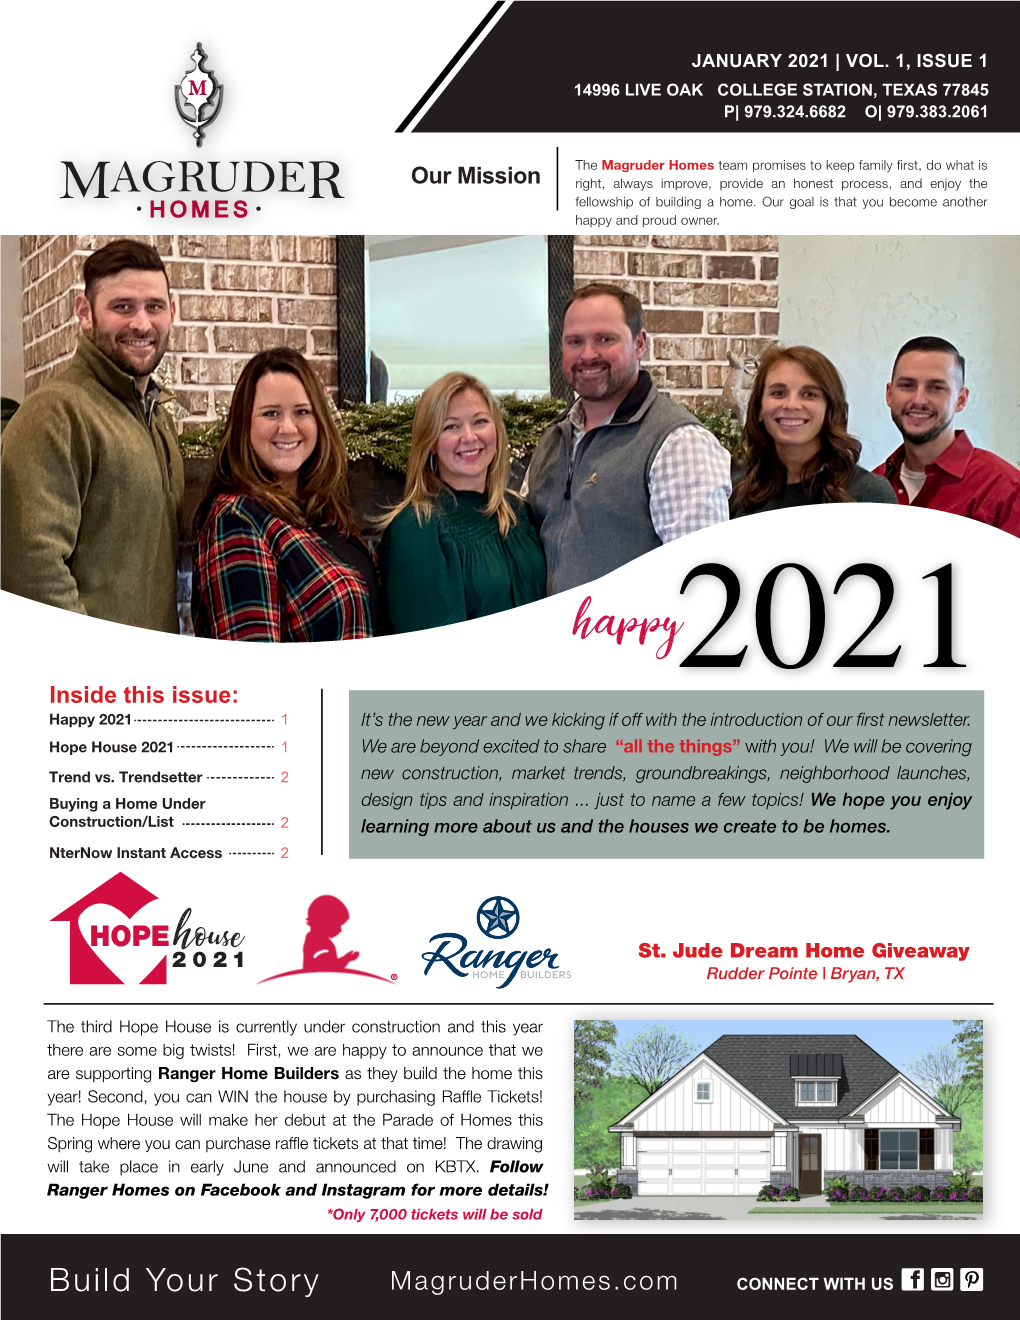 Build Your Story Magruderhomes.Com CONNECT with US JANUARY 2021 | VOL